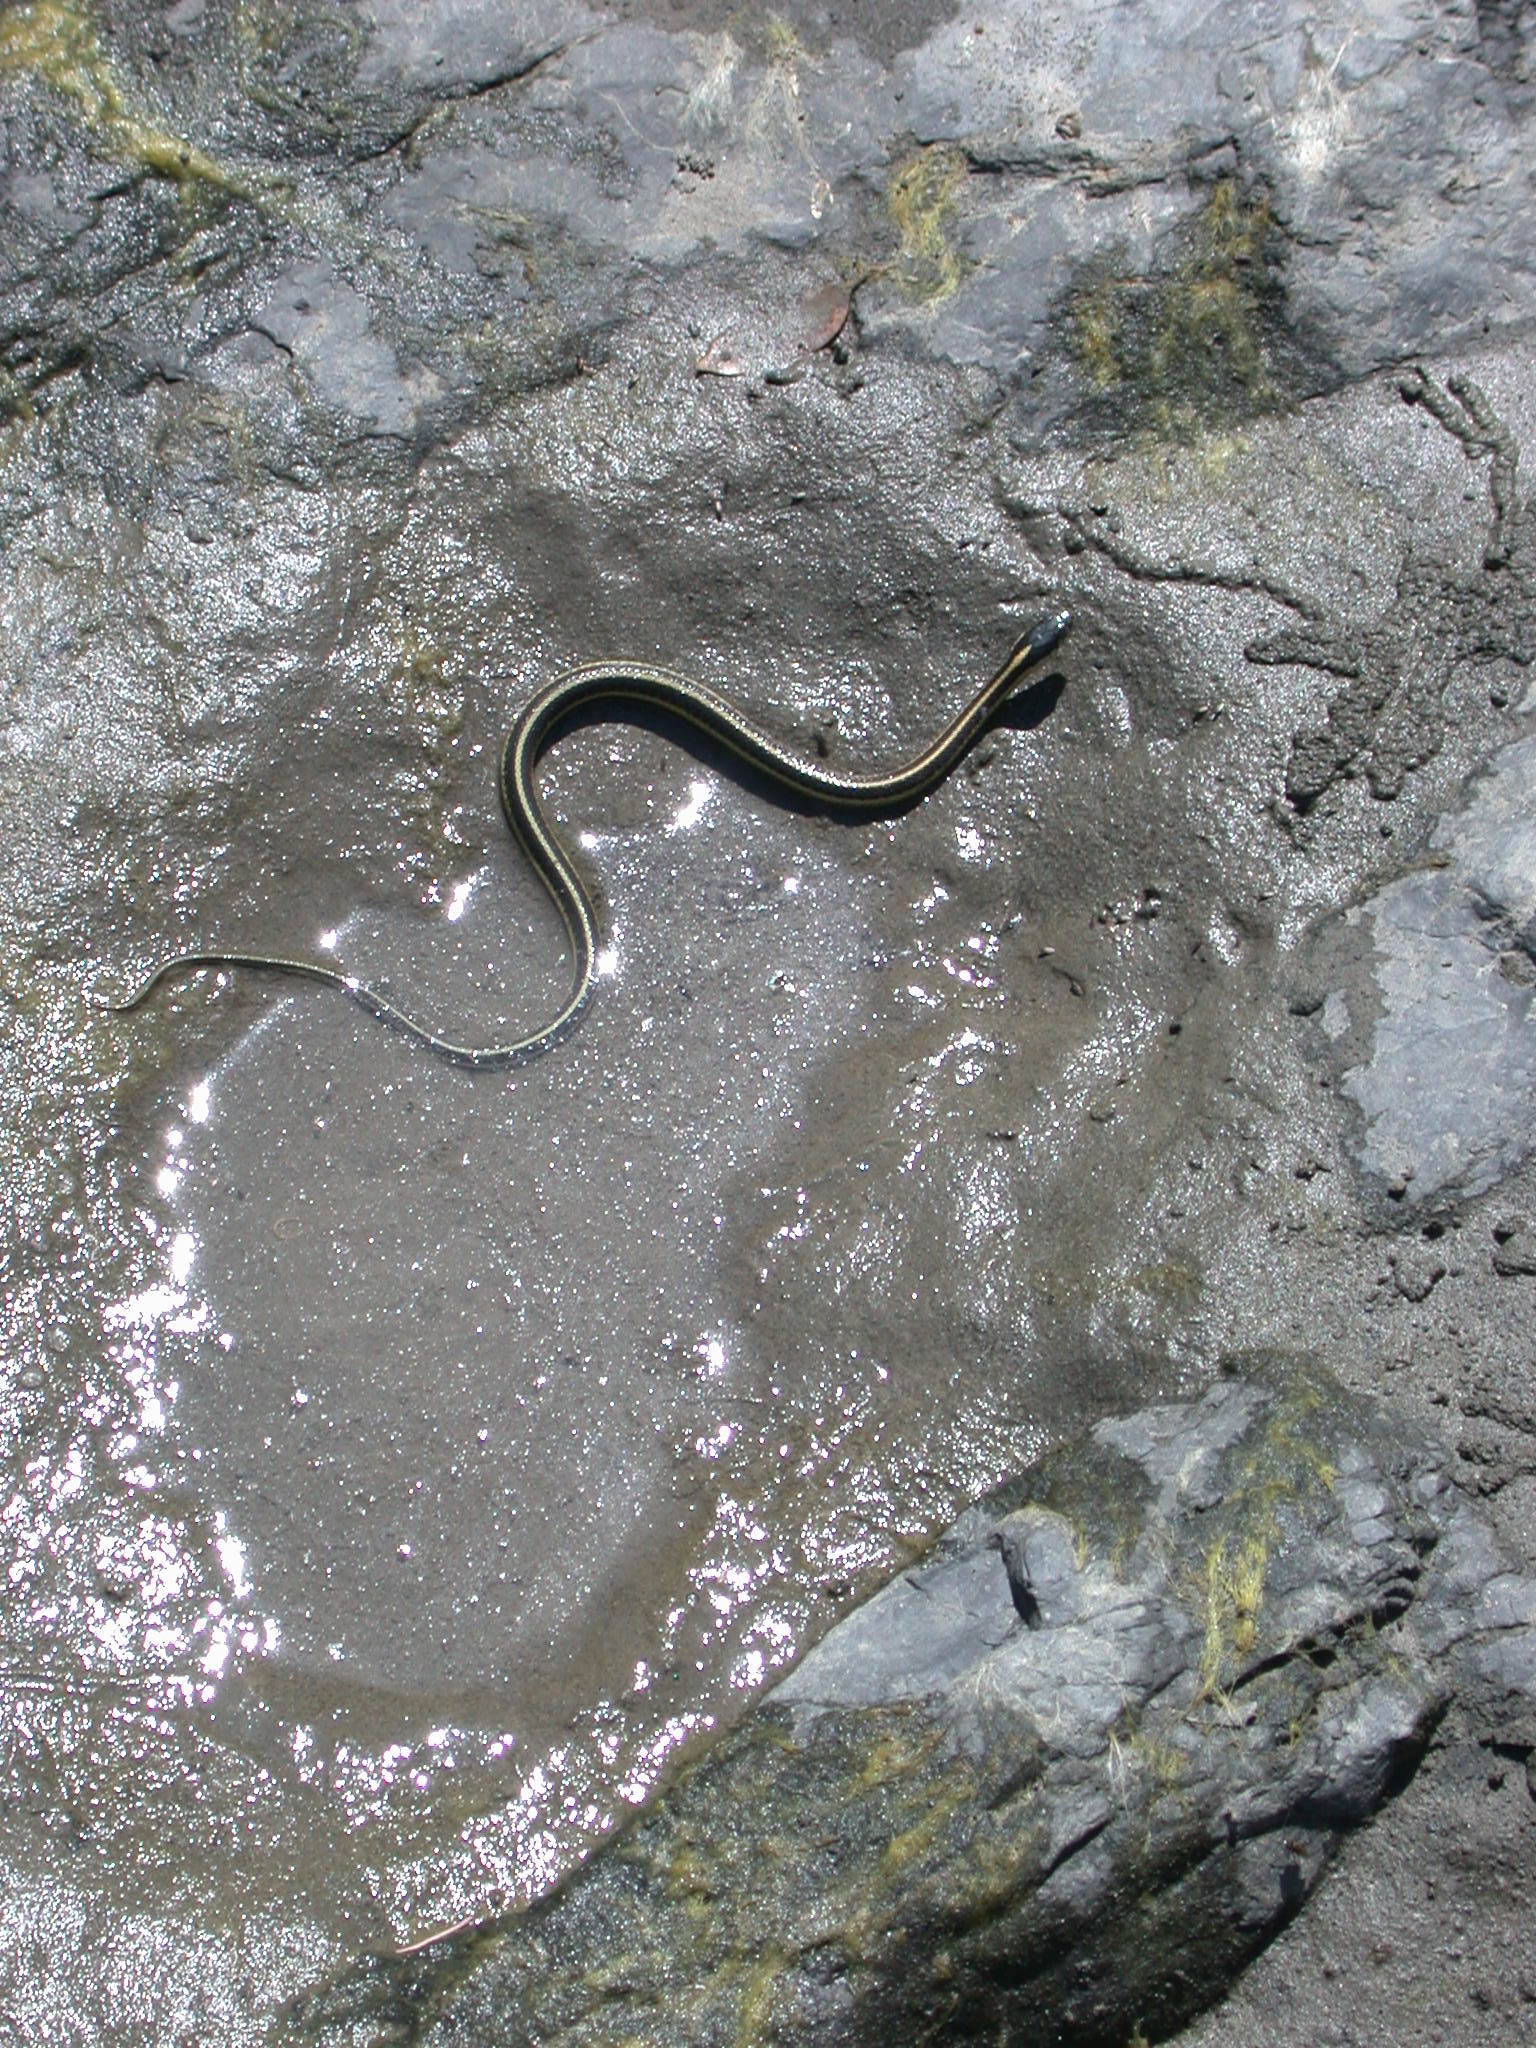 Slithery Snake on the Banks of the Eel River Near Covelo